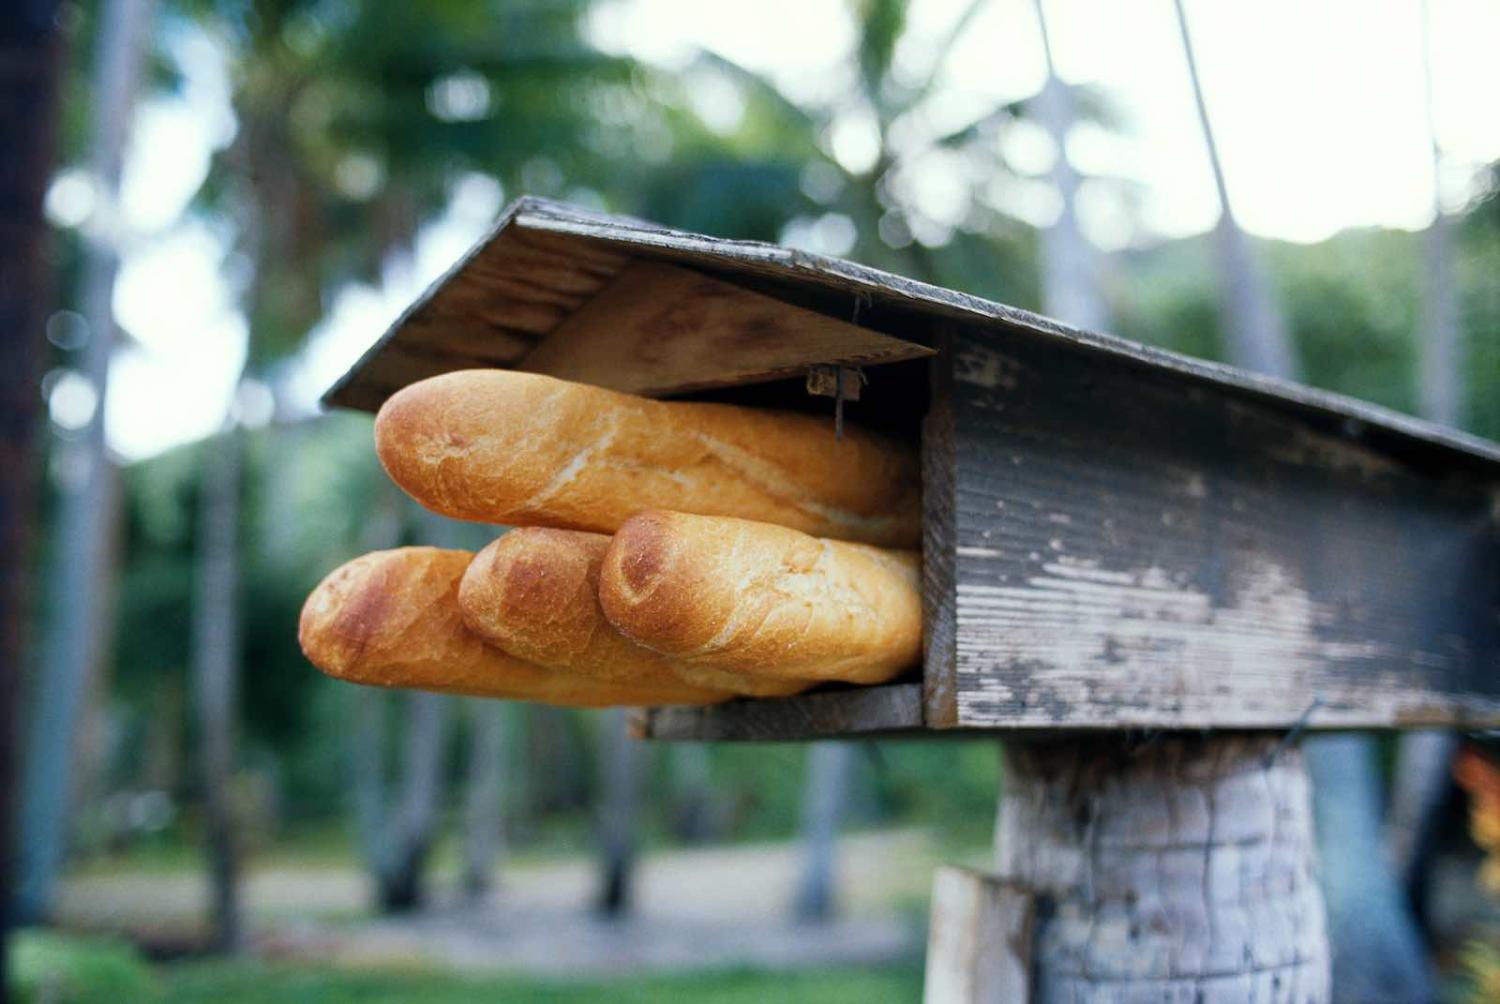 Tahitian lunch delivered by mailbox (Photo: Getty Images)